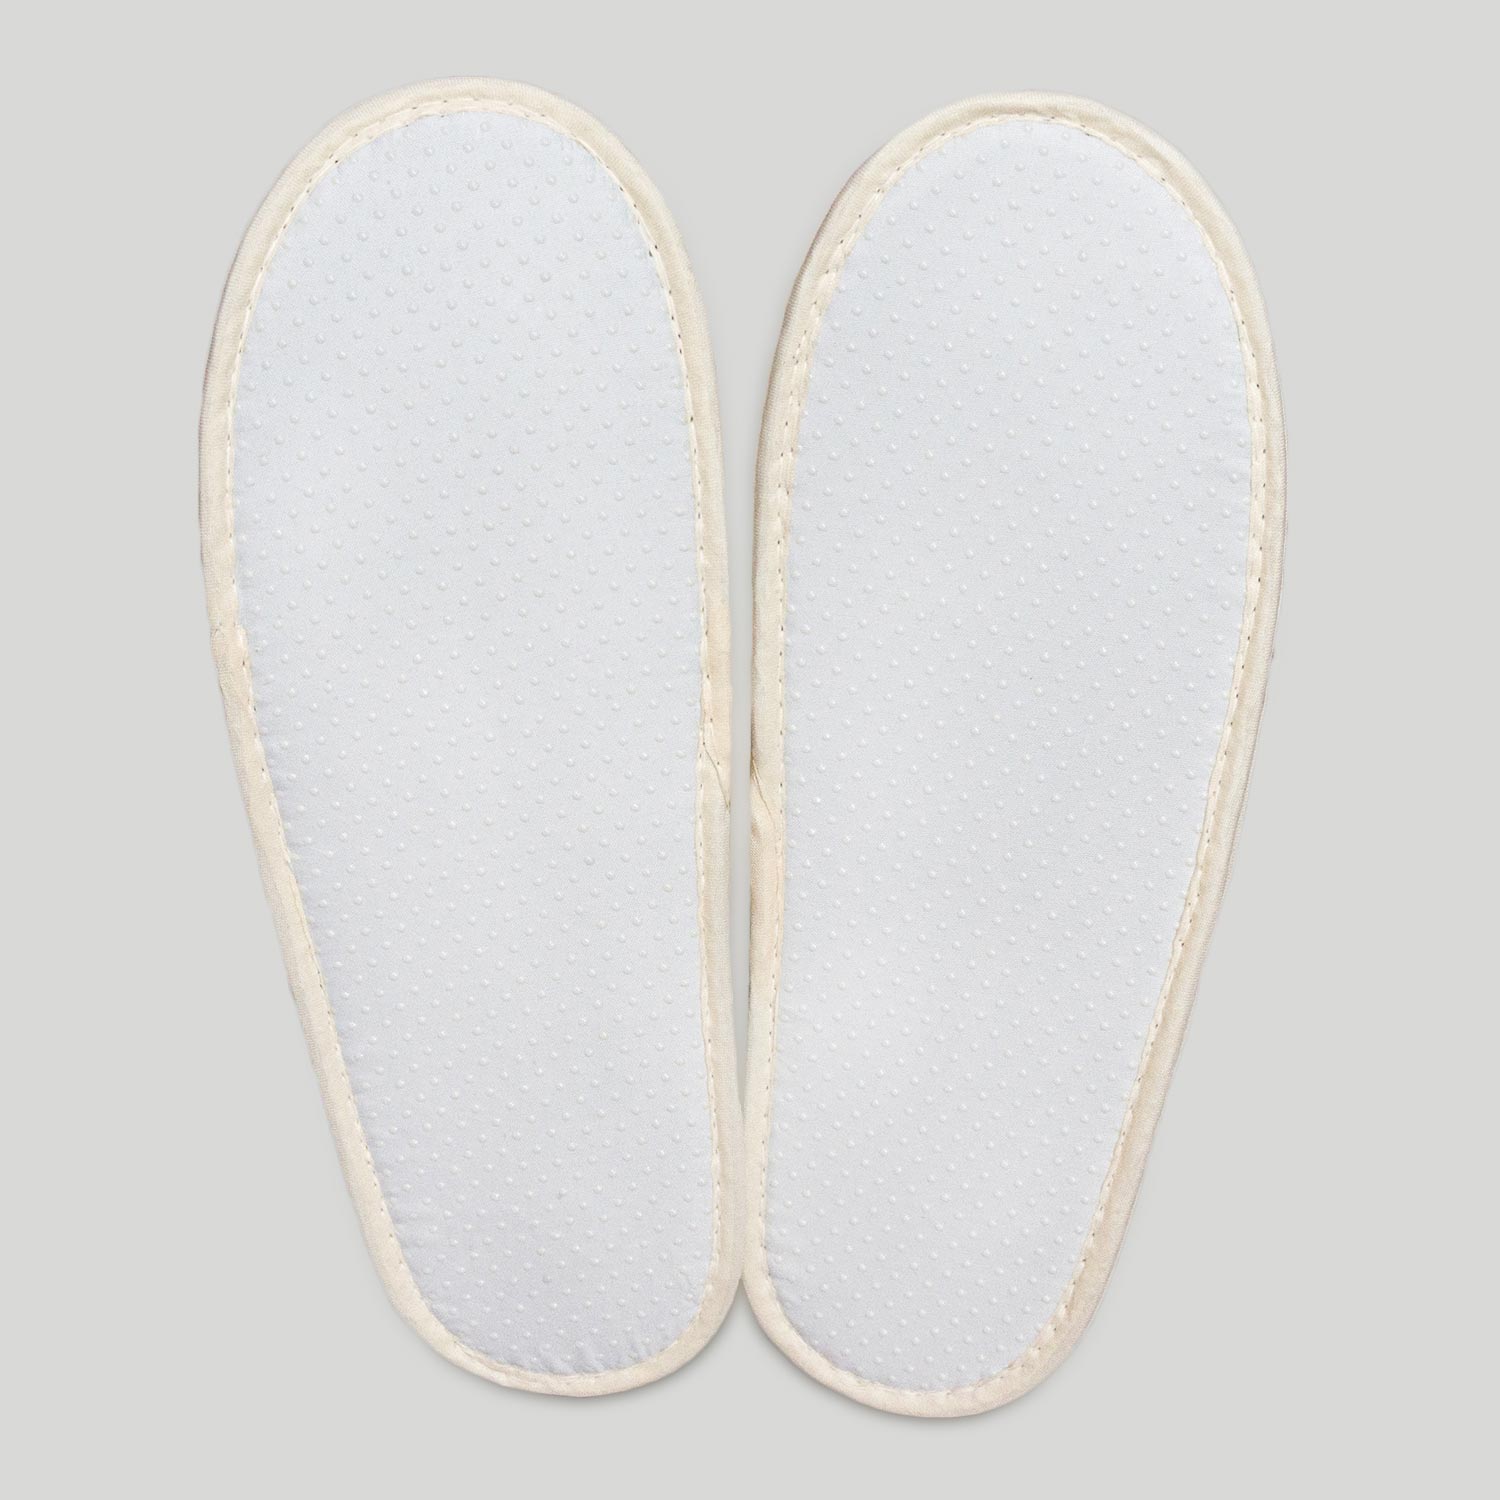 Accessories :: Hotel and Spa Slippers :: Beige Closed Toe Adult Waffle ...